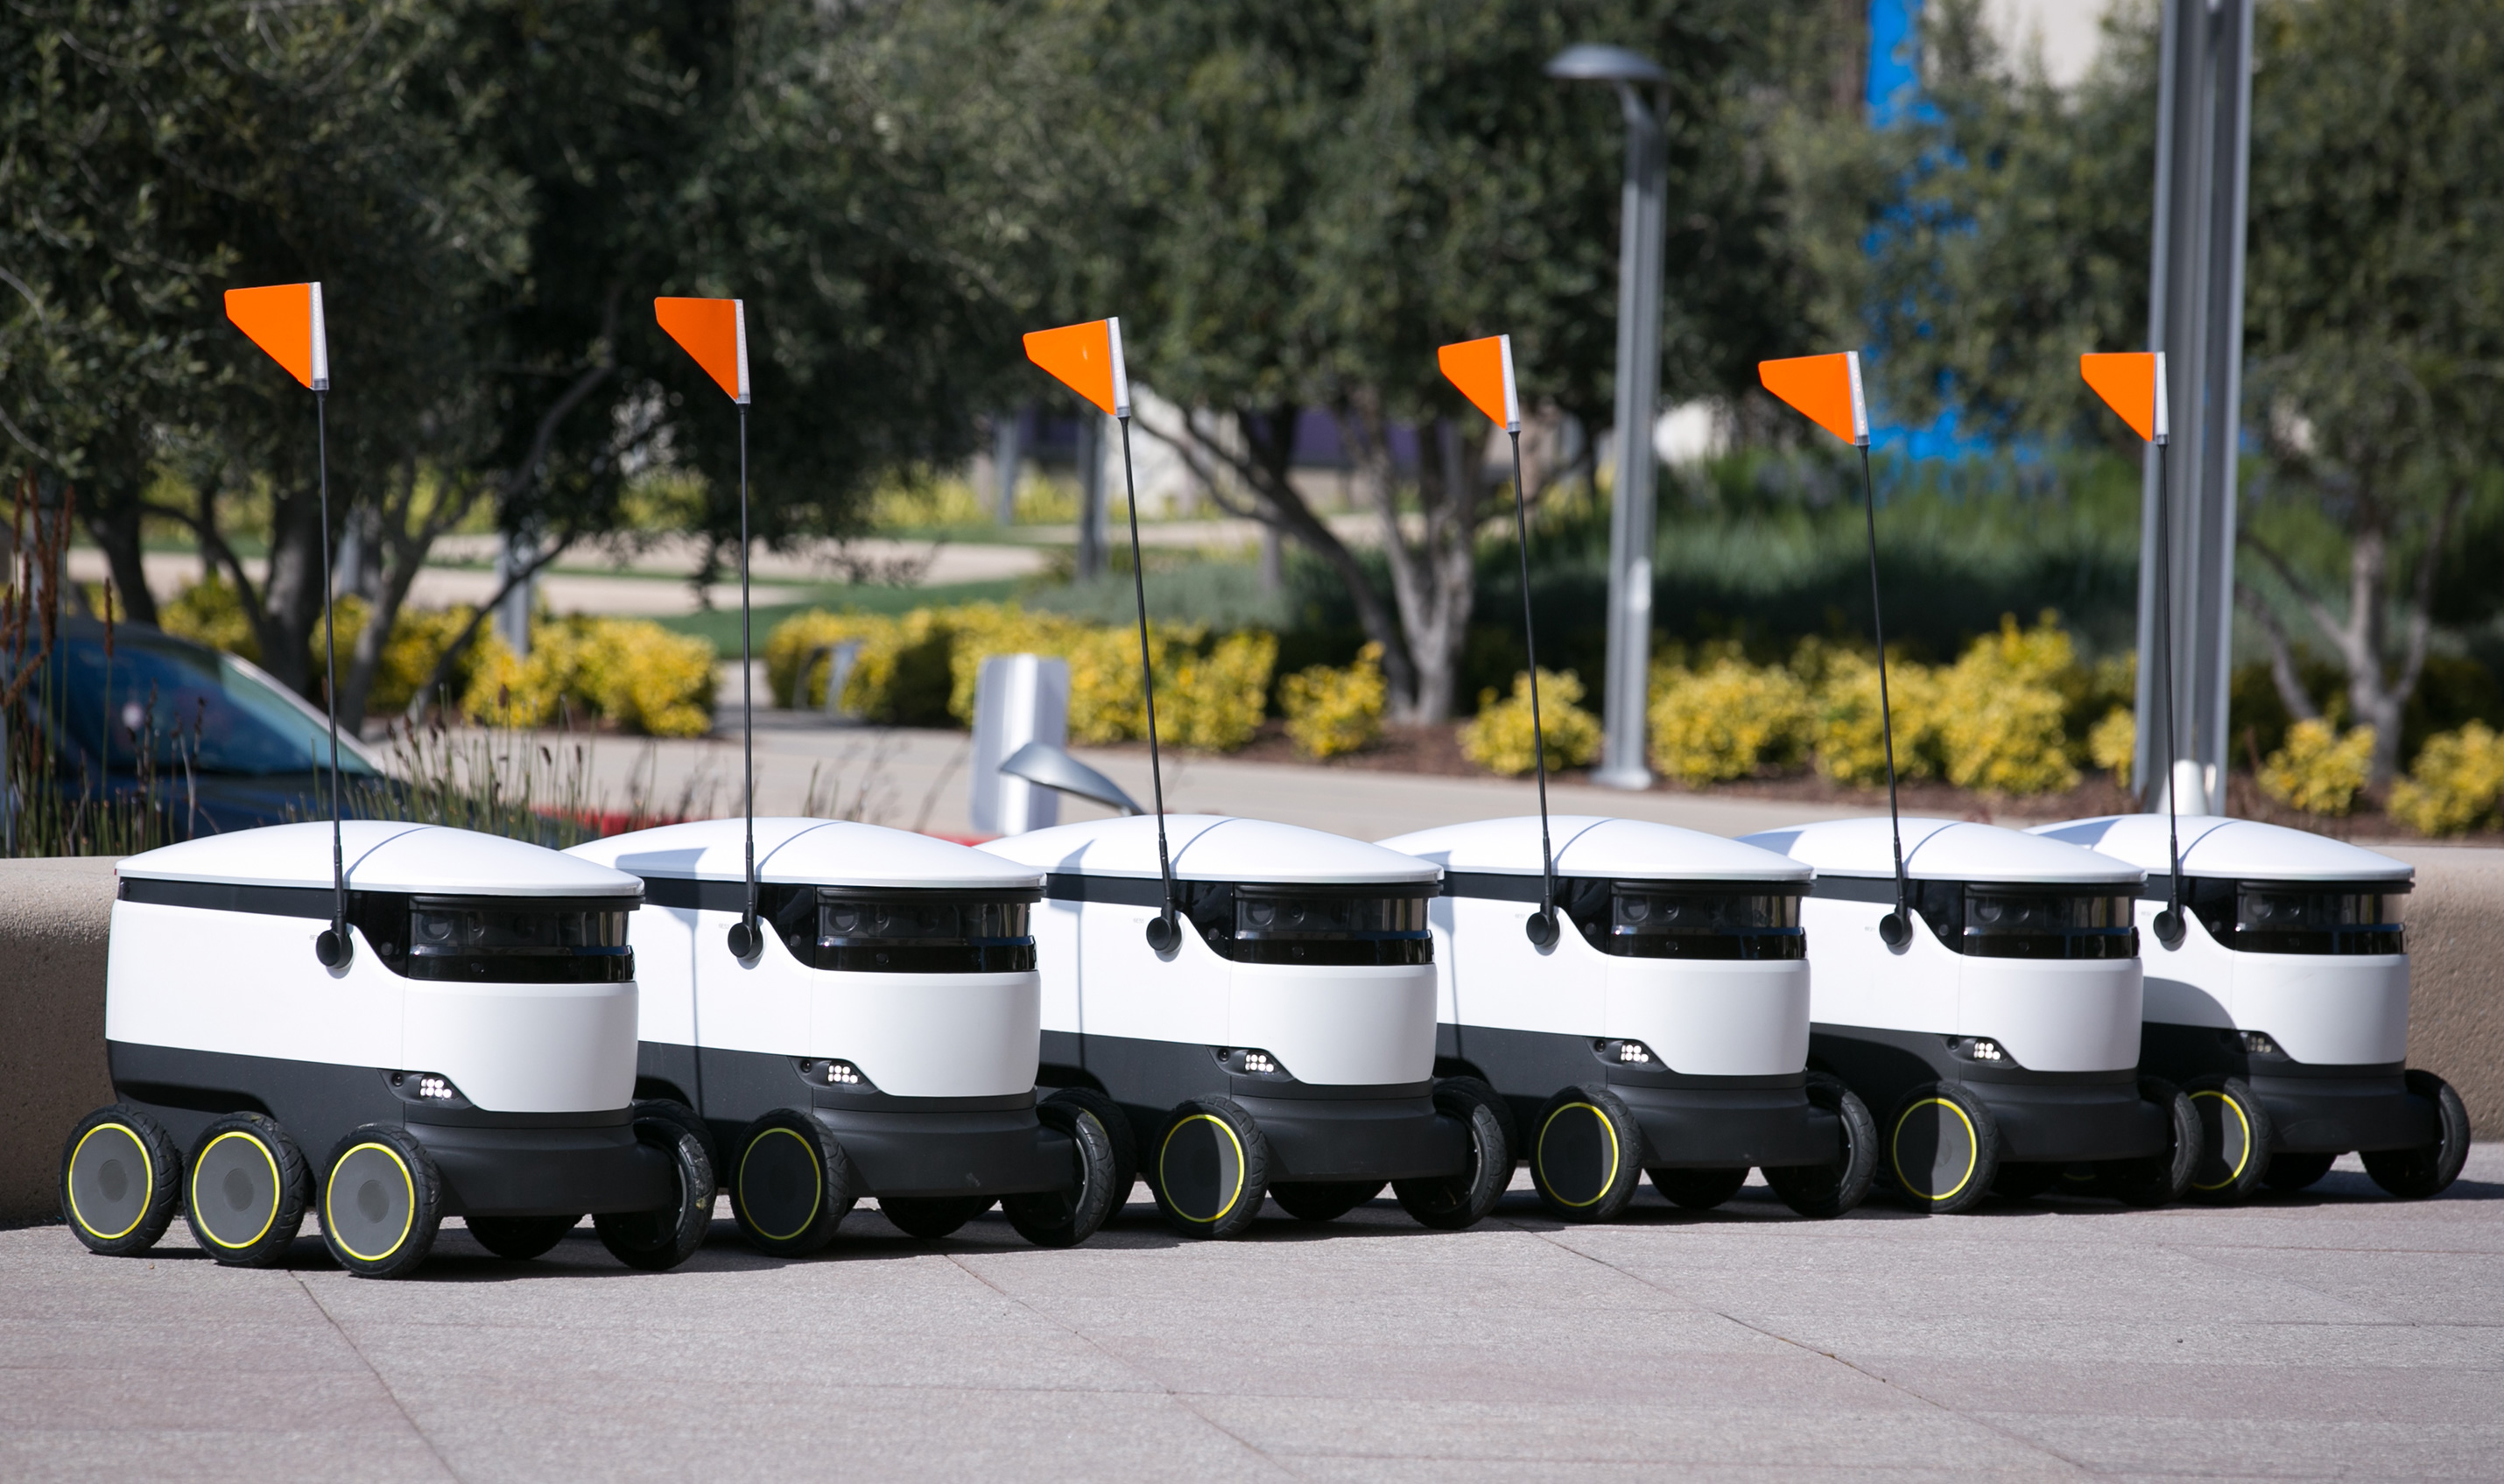 starship delivery robots line up